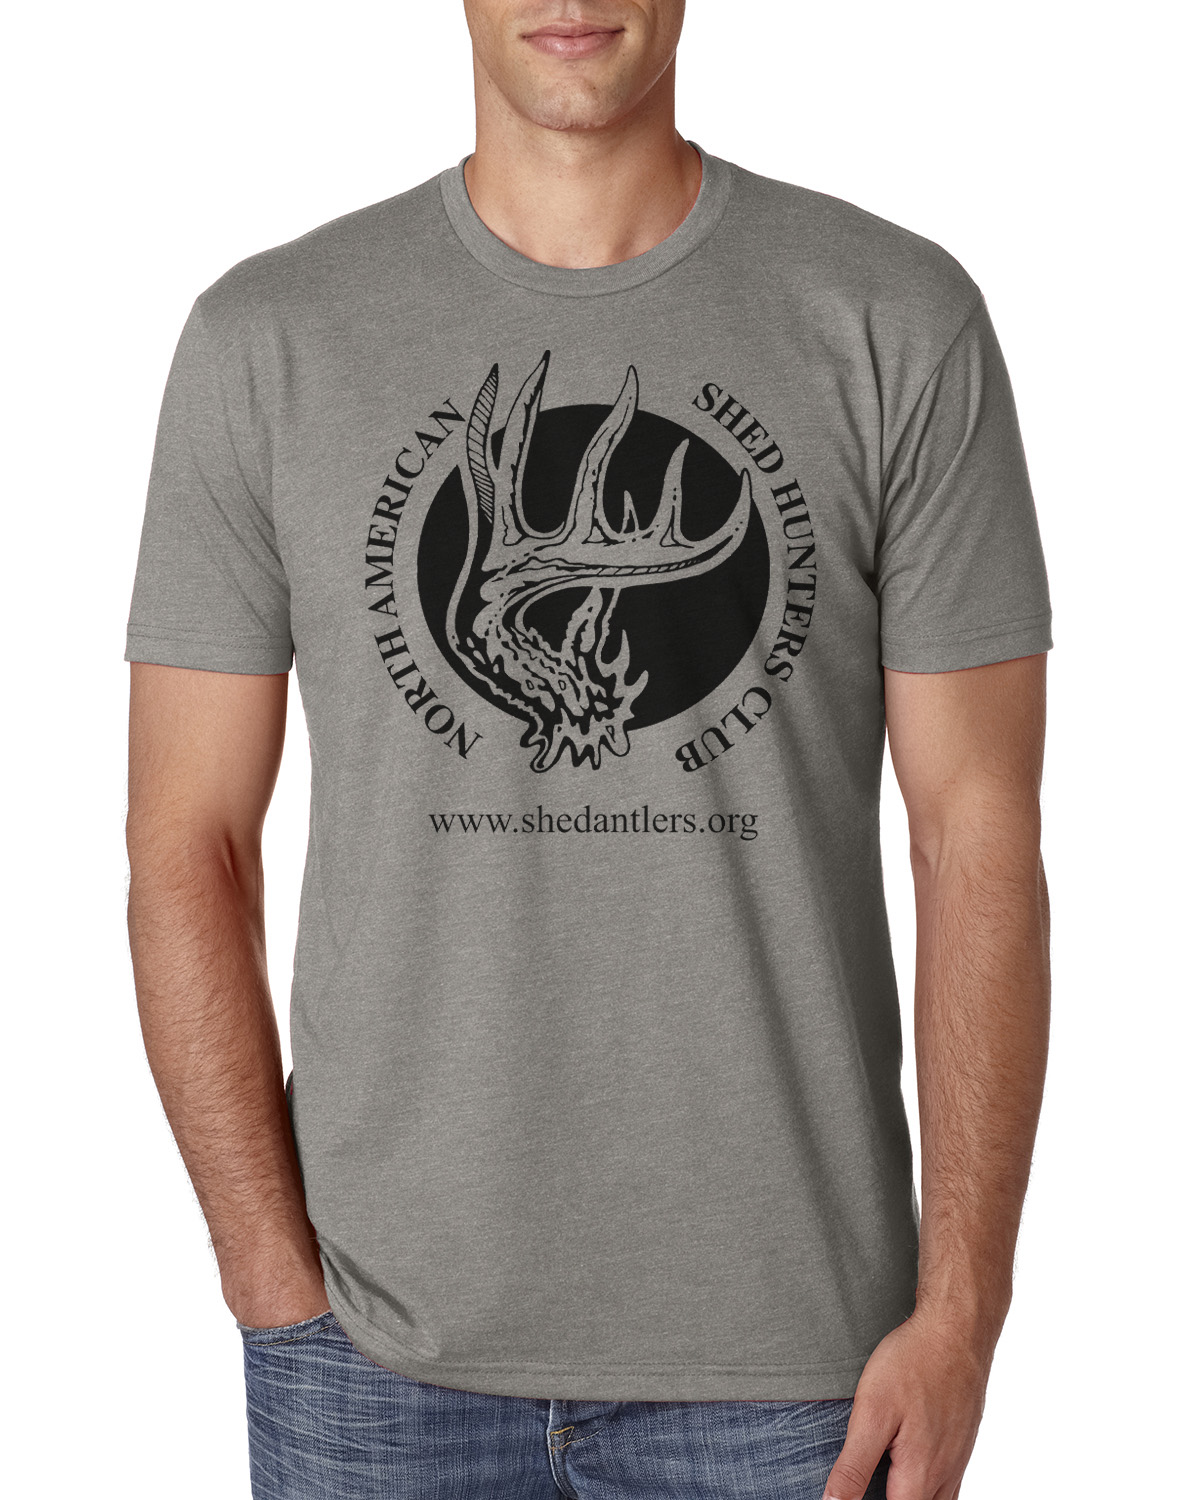 North American Shed Hunters Club Logo Tee – Gray | The North American ...